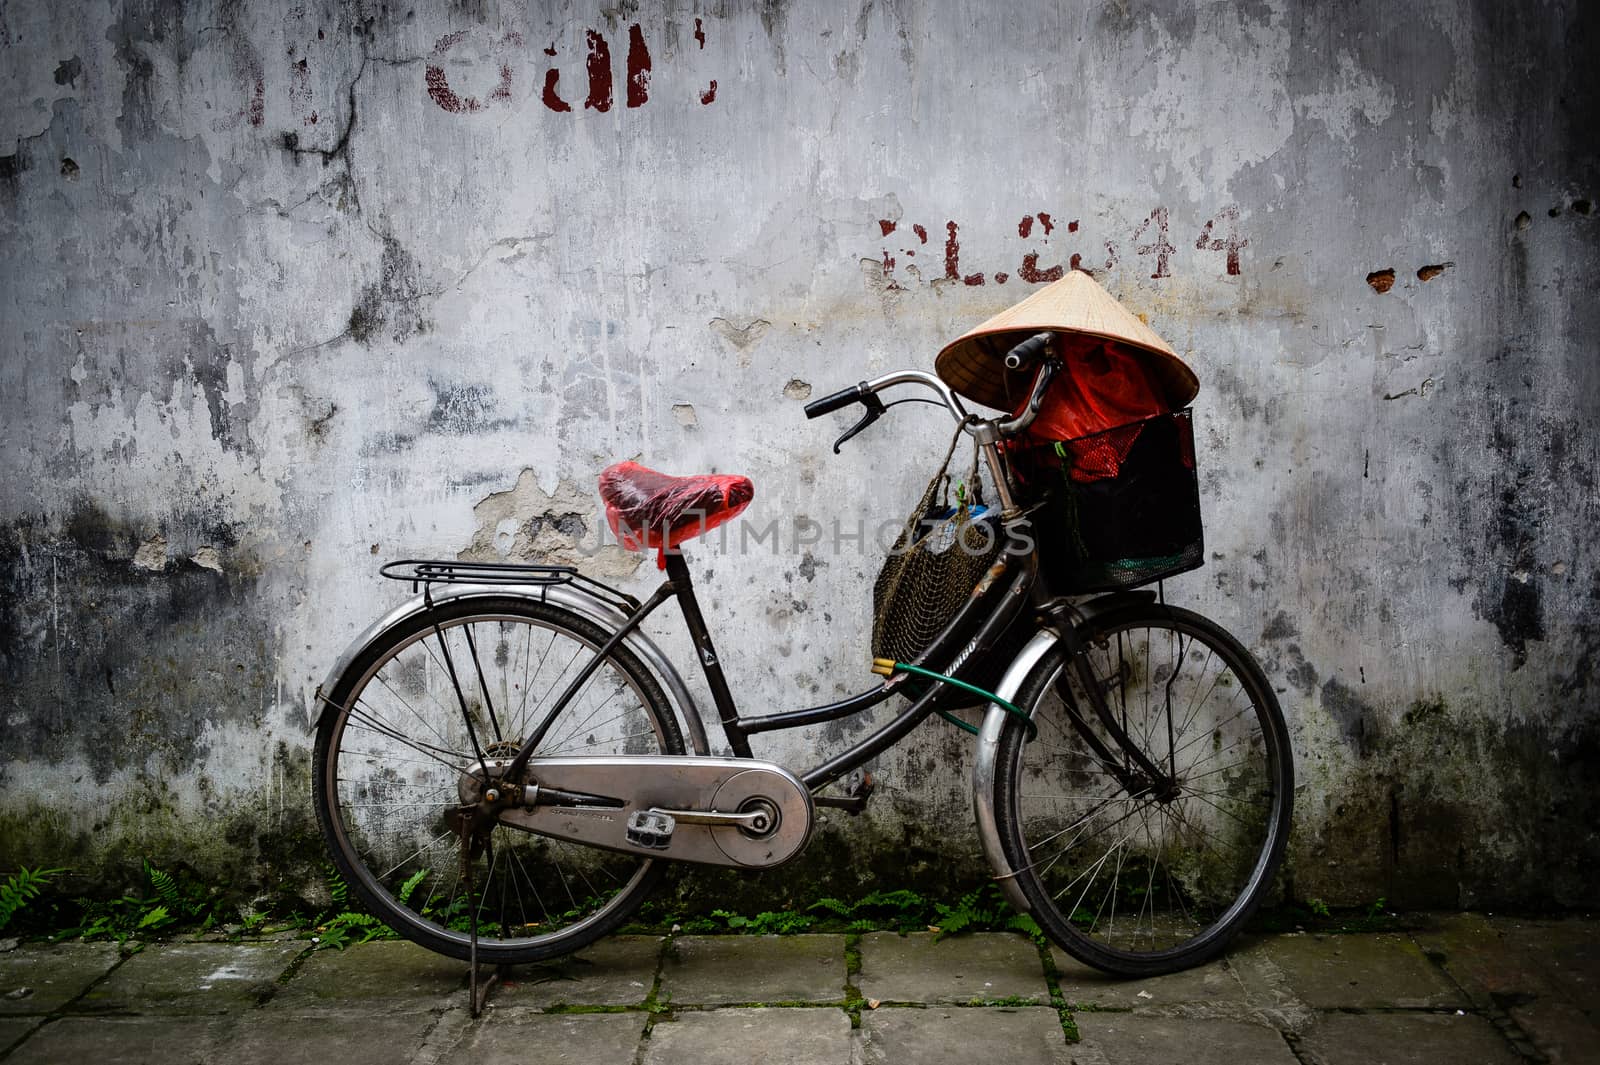 HANOI - APRIL 18: Bicycle is means of livelihood, the transportation from home to workplace April 18, 2014 Hanoi city, Vietnam